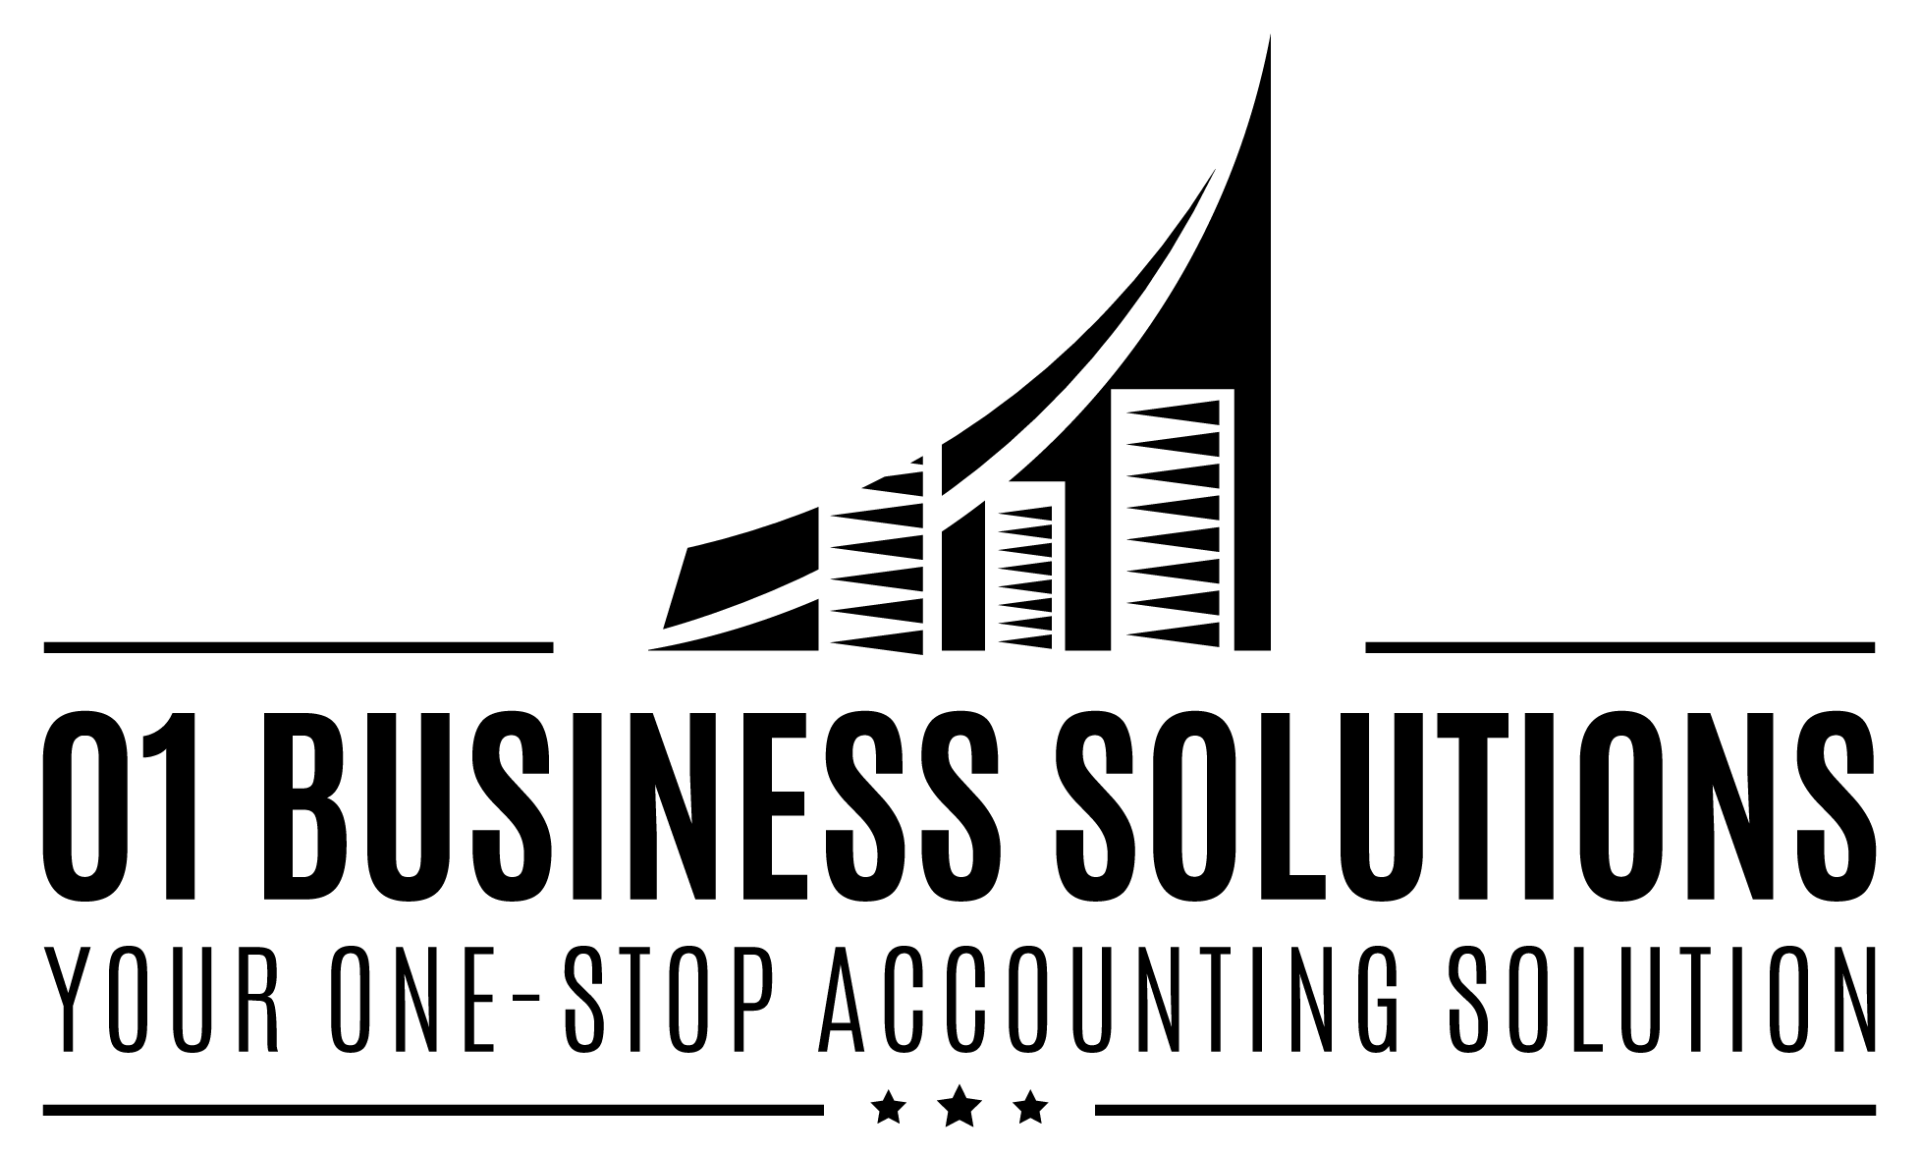 PSG Grant For Accounting Software (Claim 50% OFF)